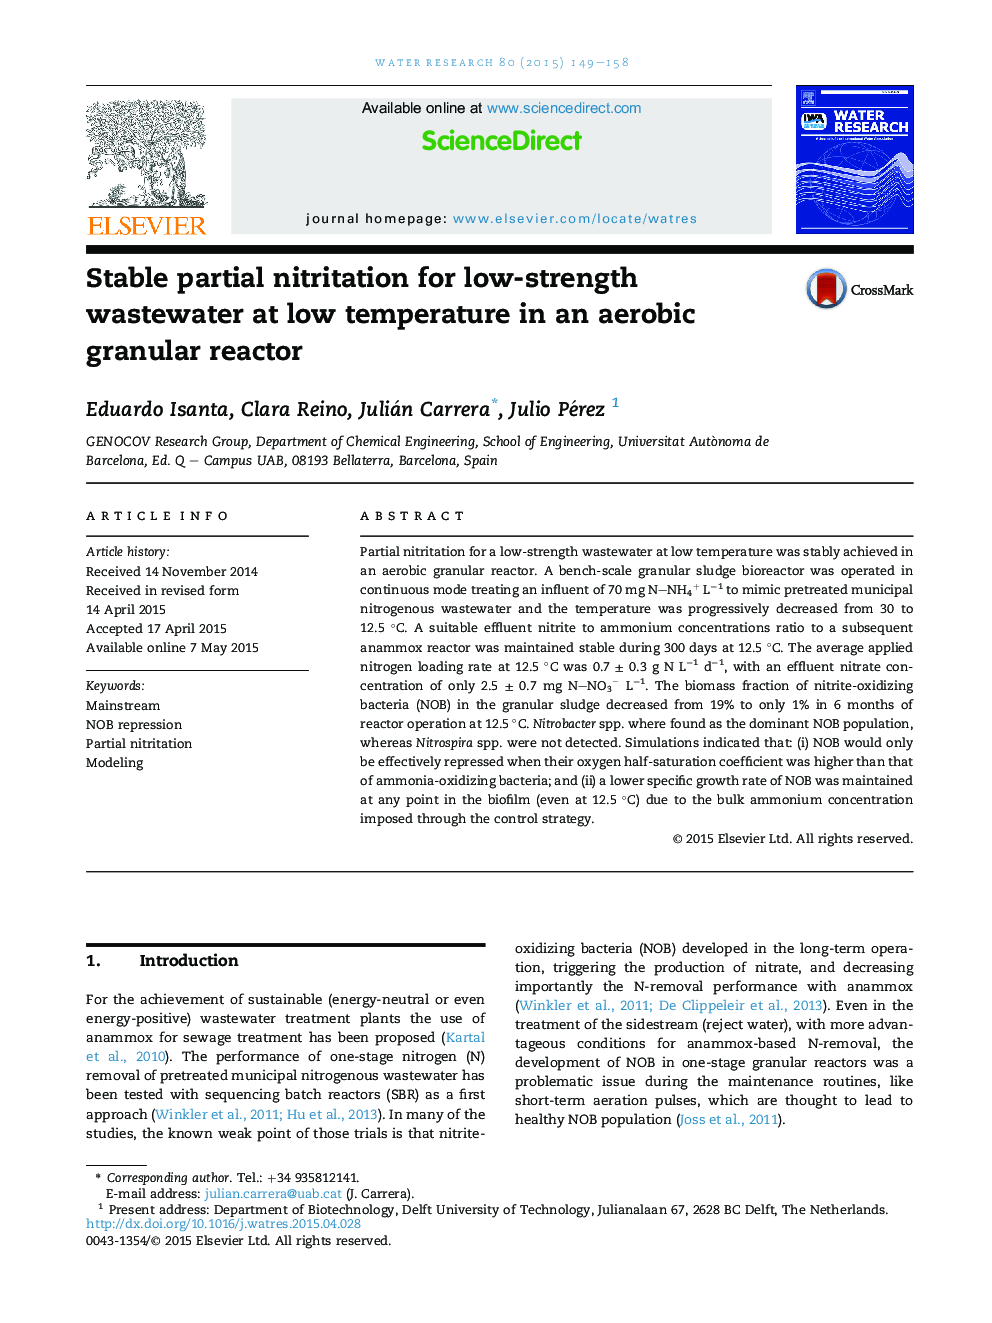 Stable partial nitritation for low-strength wastewater at low temperature in an aerobic granular reactor